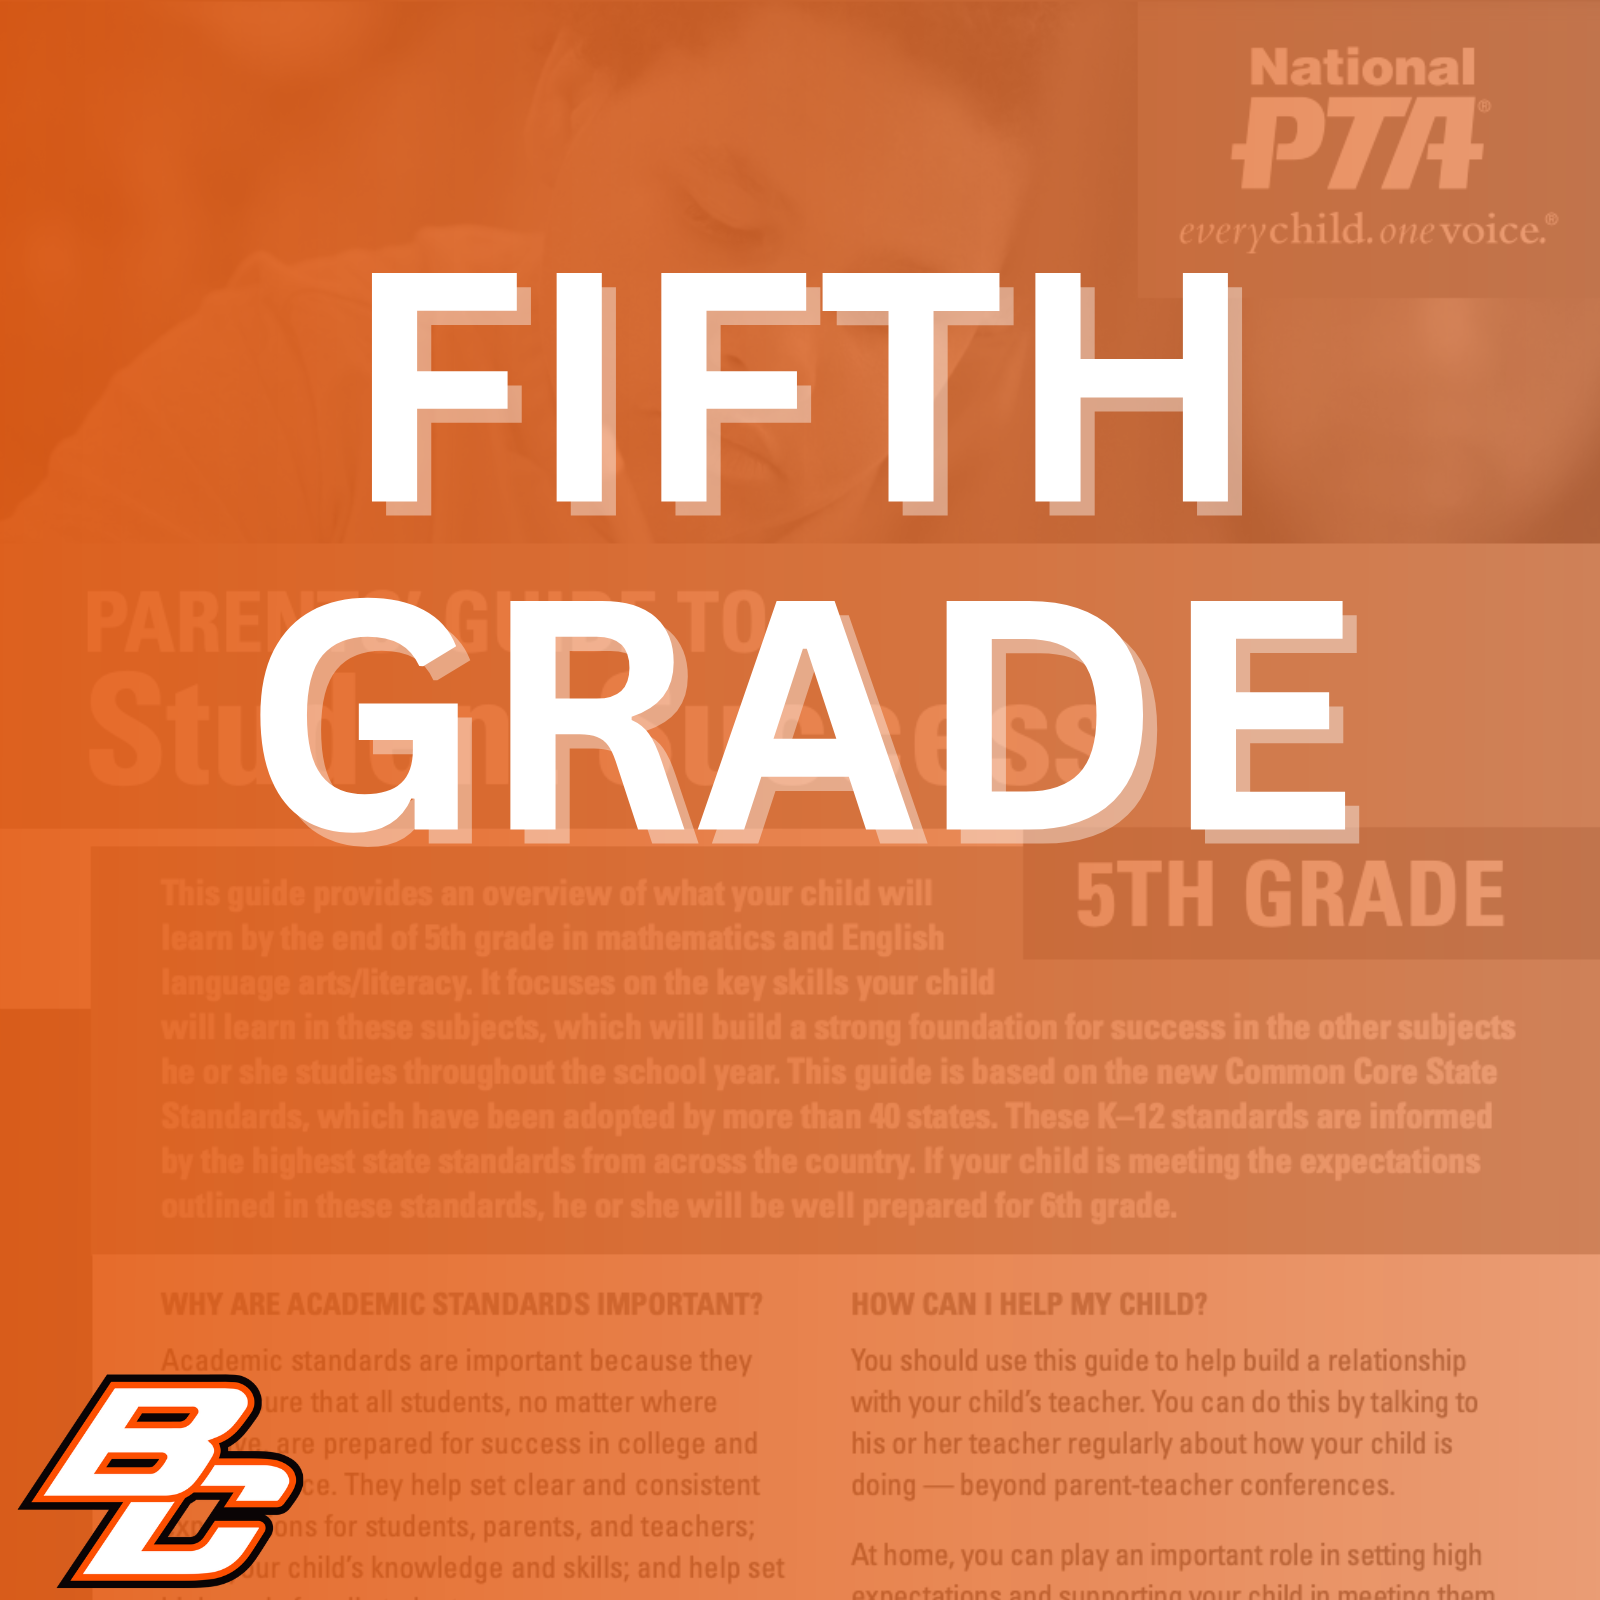 Parent’s Guide to Student Success for 5th grade: This guide provides an overview of what your child will learn by the end of 5th grade in mathematics and English language arts/literacy. It focuses on the key skills your child will learn in these subjects, which will build a strong foundation for success in the other subjects he or she studies throughout the school year. This guide is based on the new Common Core State Standards, which have been adopted by more than 40 states. These K-12 standards are informed by the highest state standards from across the country. If your child is meeting the expectations outlined in these standards, he or she will be well prepared for 6th grade.  Why are academic standards important? Academic standards are important because they help ensure that all students, no matter where they live, are prepared for success in college and the workforce. They help set clear and consistent expectations for students, parents, and teachers; build your child's knowledge and skills; and help set high goals for all students.  Of course, high standards are not the only thing needed for our children's success. But standards provide an important first step - a clear roadmap for learning for teachers, parents, and students. Having clearly defined goals helps families and teachers work together to ensure that students succeed. Standards help parents and teachers know when students need extra assistance or when they need to be challenged even more. They also will help your child develop critical thinking skills that will prepare him or her for college and career.  How can I help my child? You should use this guide to help build a relationship with your child's teacher. You can do this by talking to his or her teacher regularly about how your child is doing - beyond parent-teacher conferences.  At home, you can play an important role in setting high expectations and supporting your child in meeting them. If your child needs a little extra help or wants to learn more about a subject, work with his or her teacher to identify opportunities for tutoring, to get involved in clubs after school, or to find other resources.  This guide includes: An overview of some of the key things your child will learn in English/literacy and math in 5th grade, ideas for activities to help your child learn at home and topics of discussion for talking to your child's teacher about his or her academic progress.